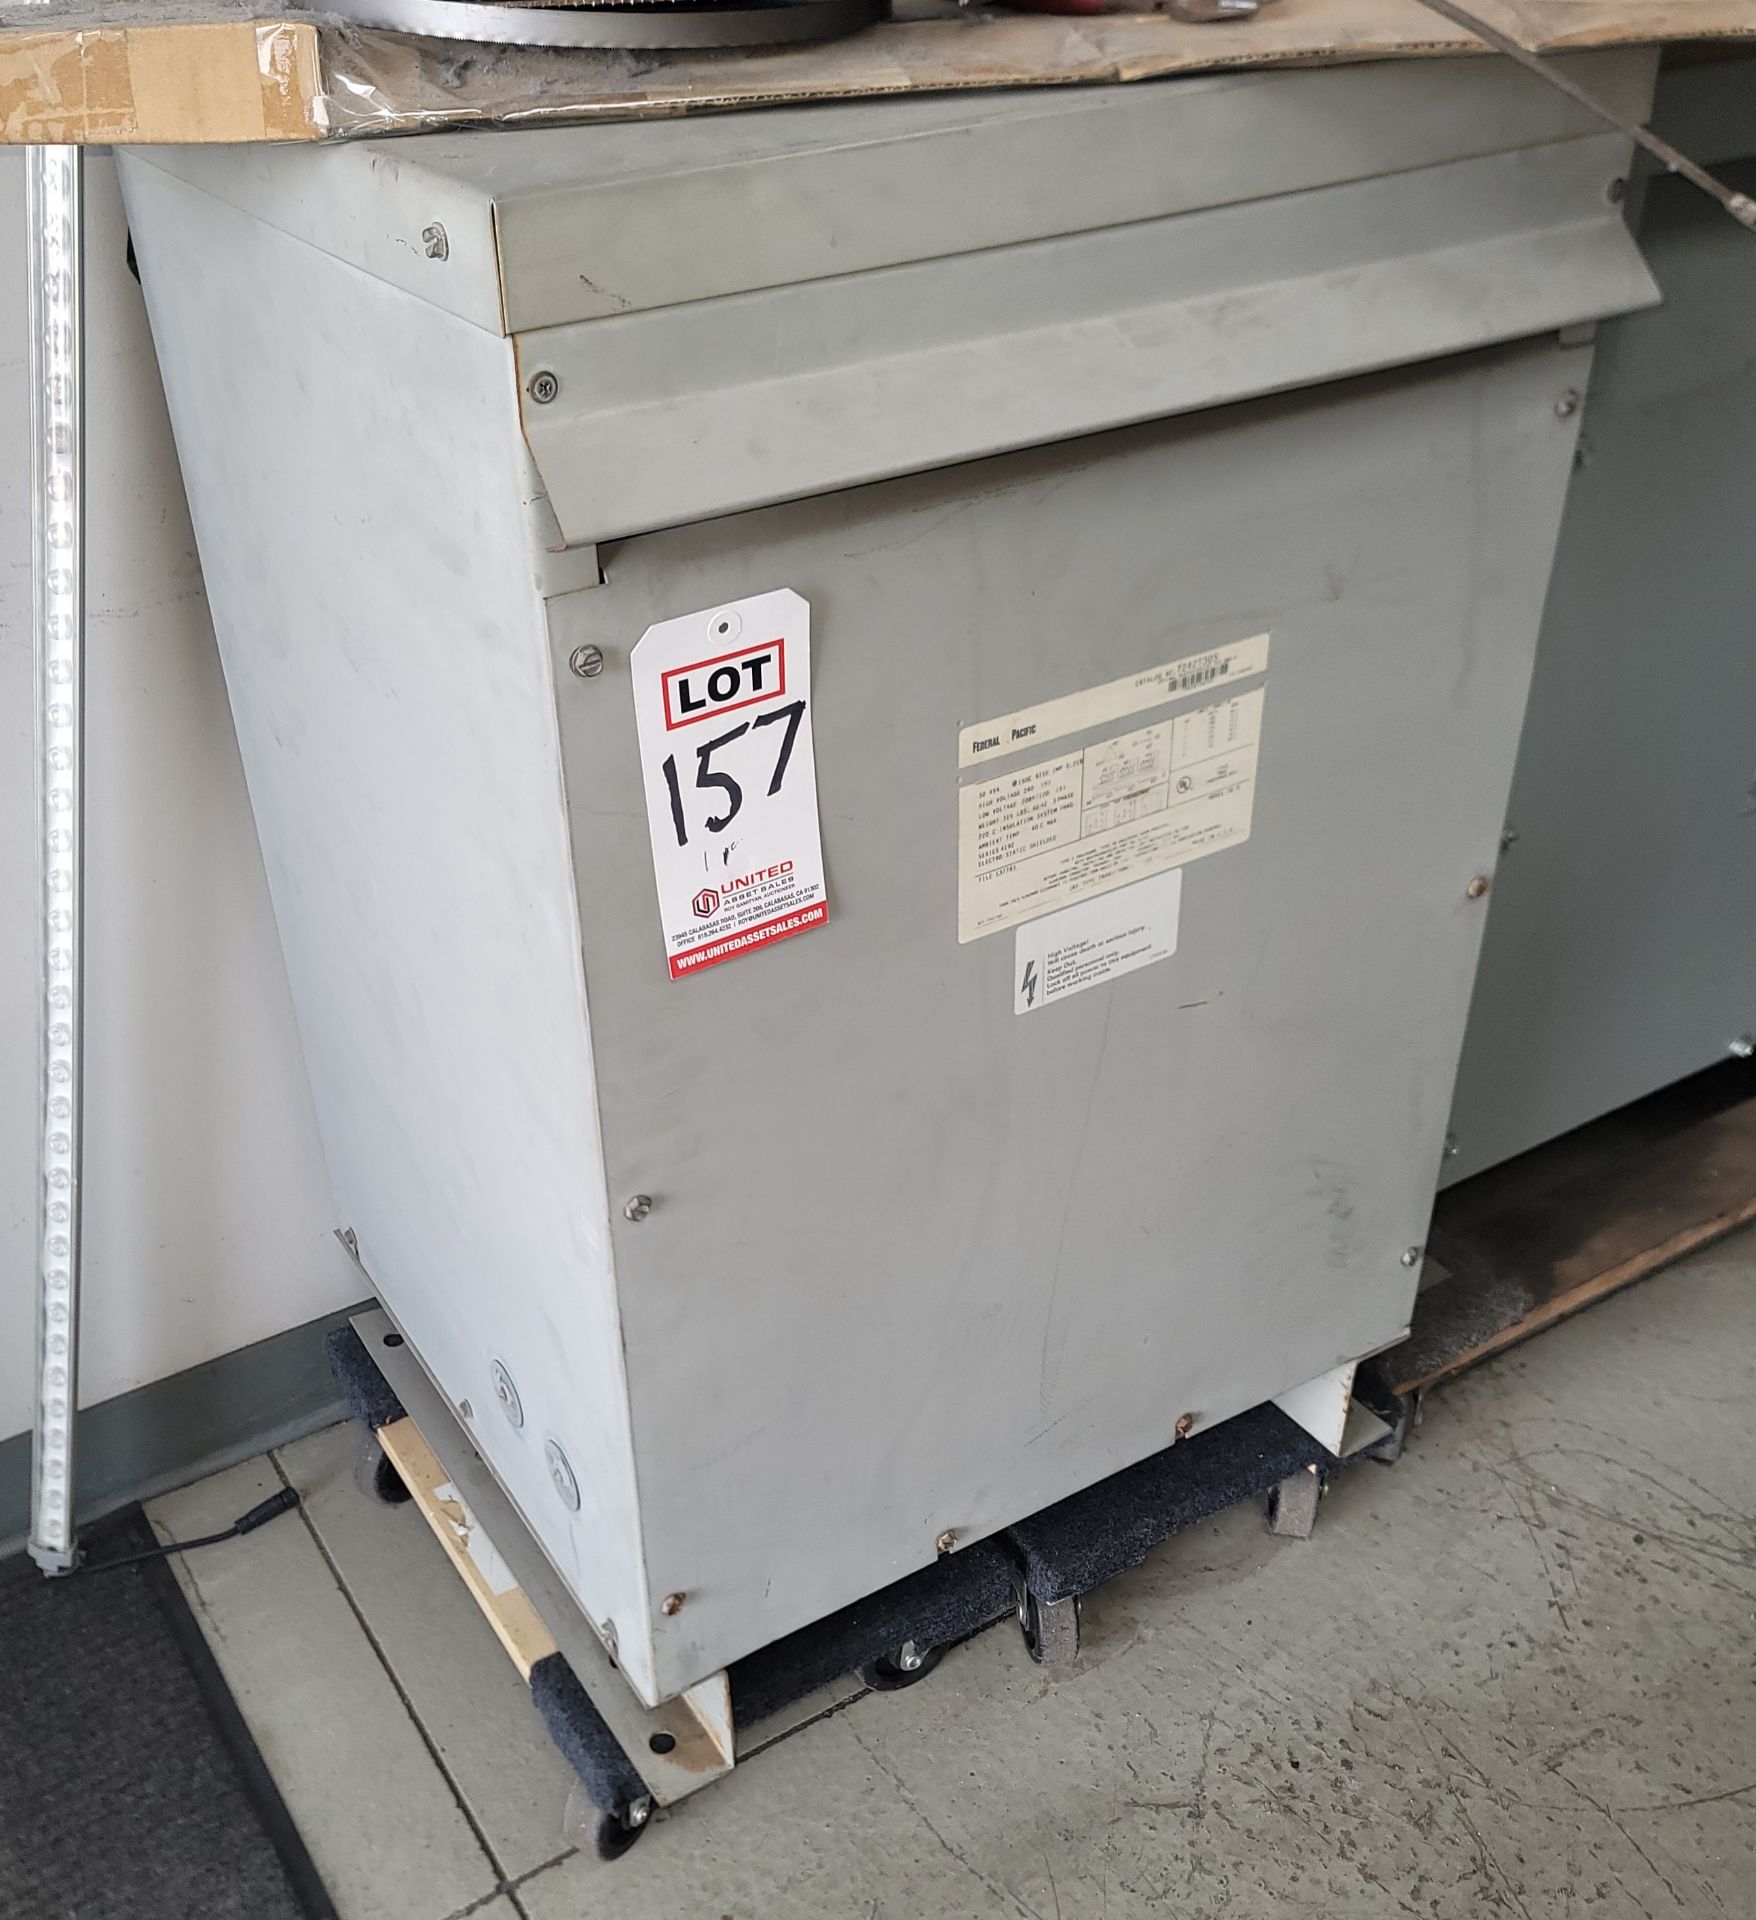 FEDERAL PACIFIC DRY TYPE TRANSFORMER, MODEL 36B, CAT. NO. T242T30S, 30 KVA, 3-PHASE, H.V.: 240, L.